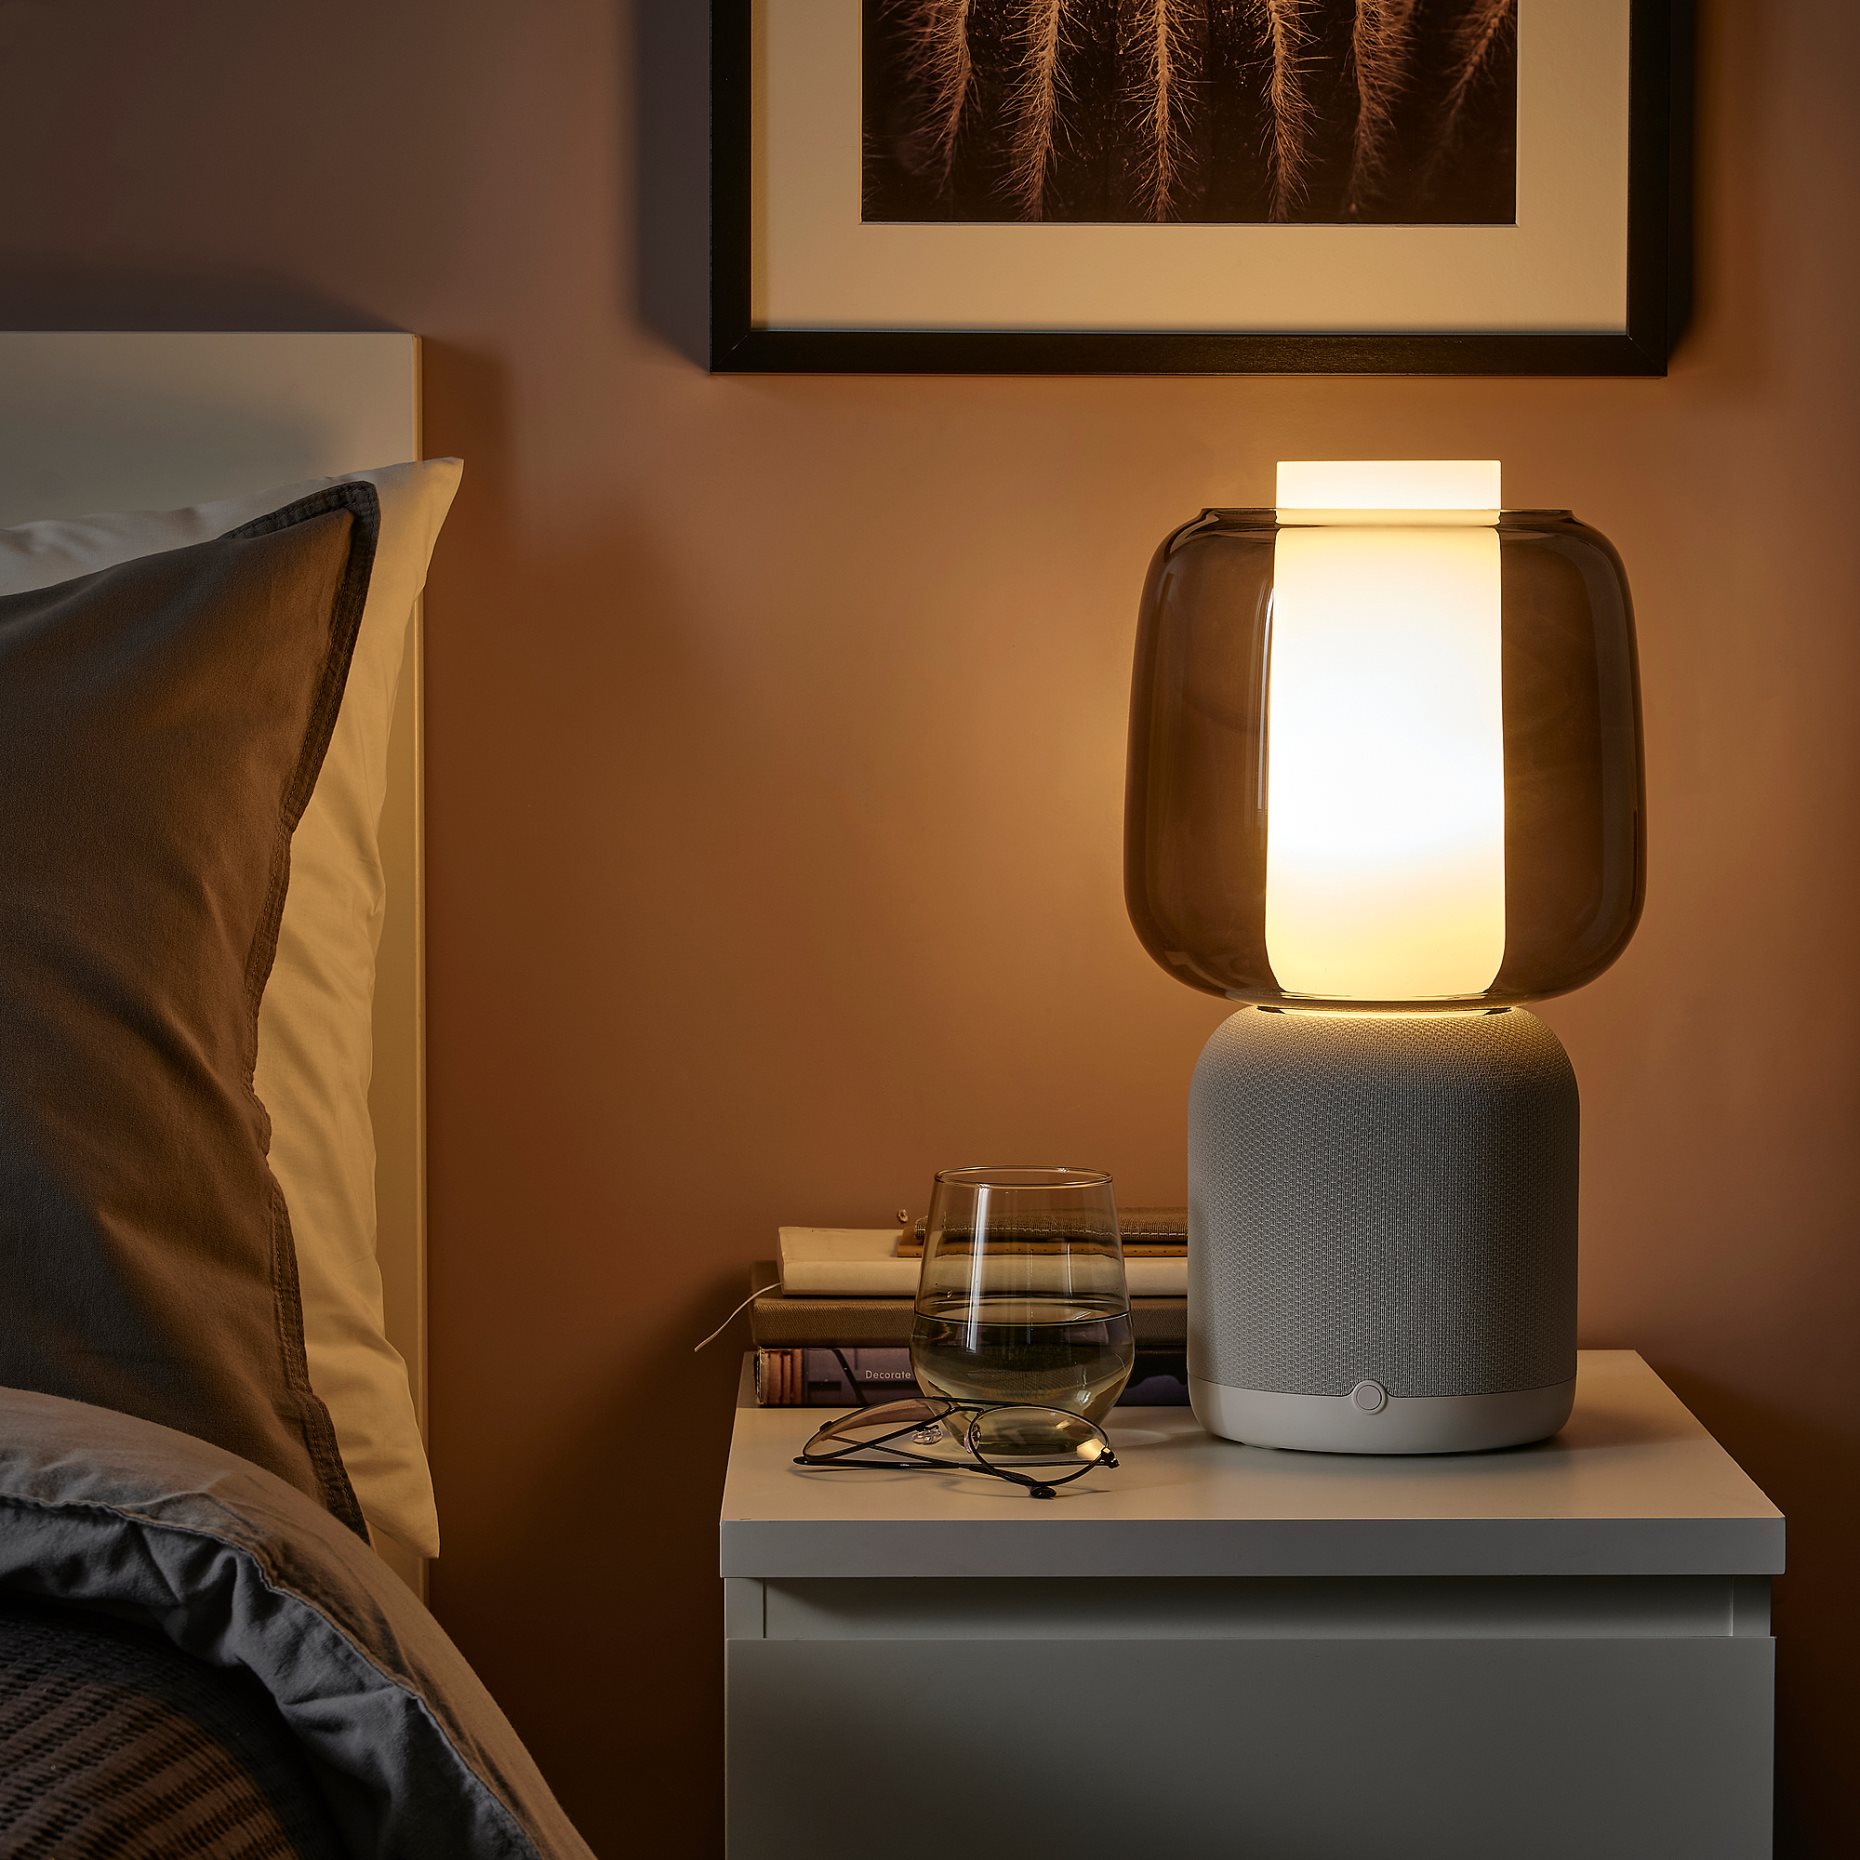 SYMFONISK, speaker lamp with Wi-Fi, glass shade, 094.827.25